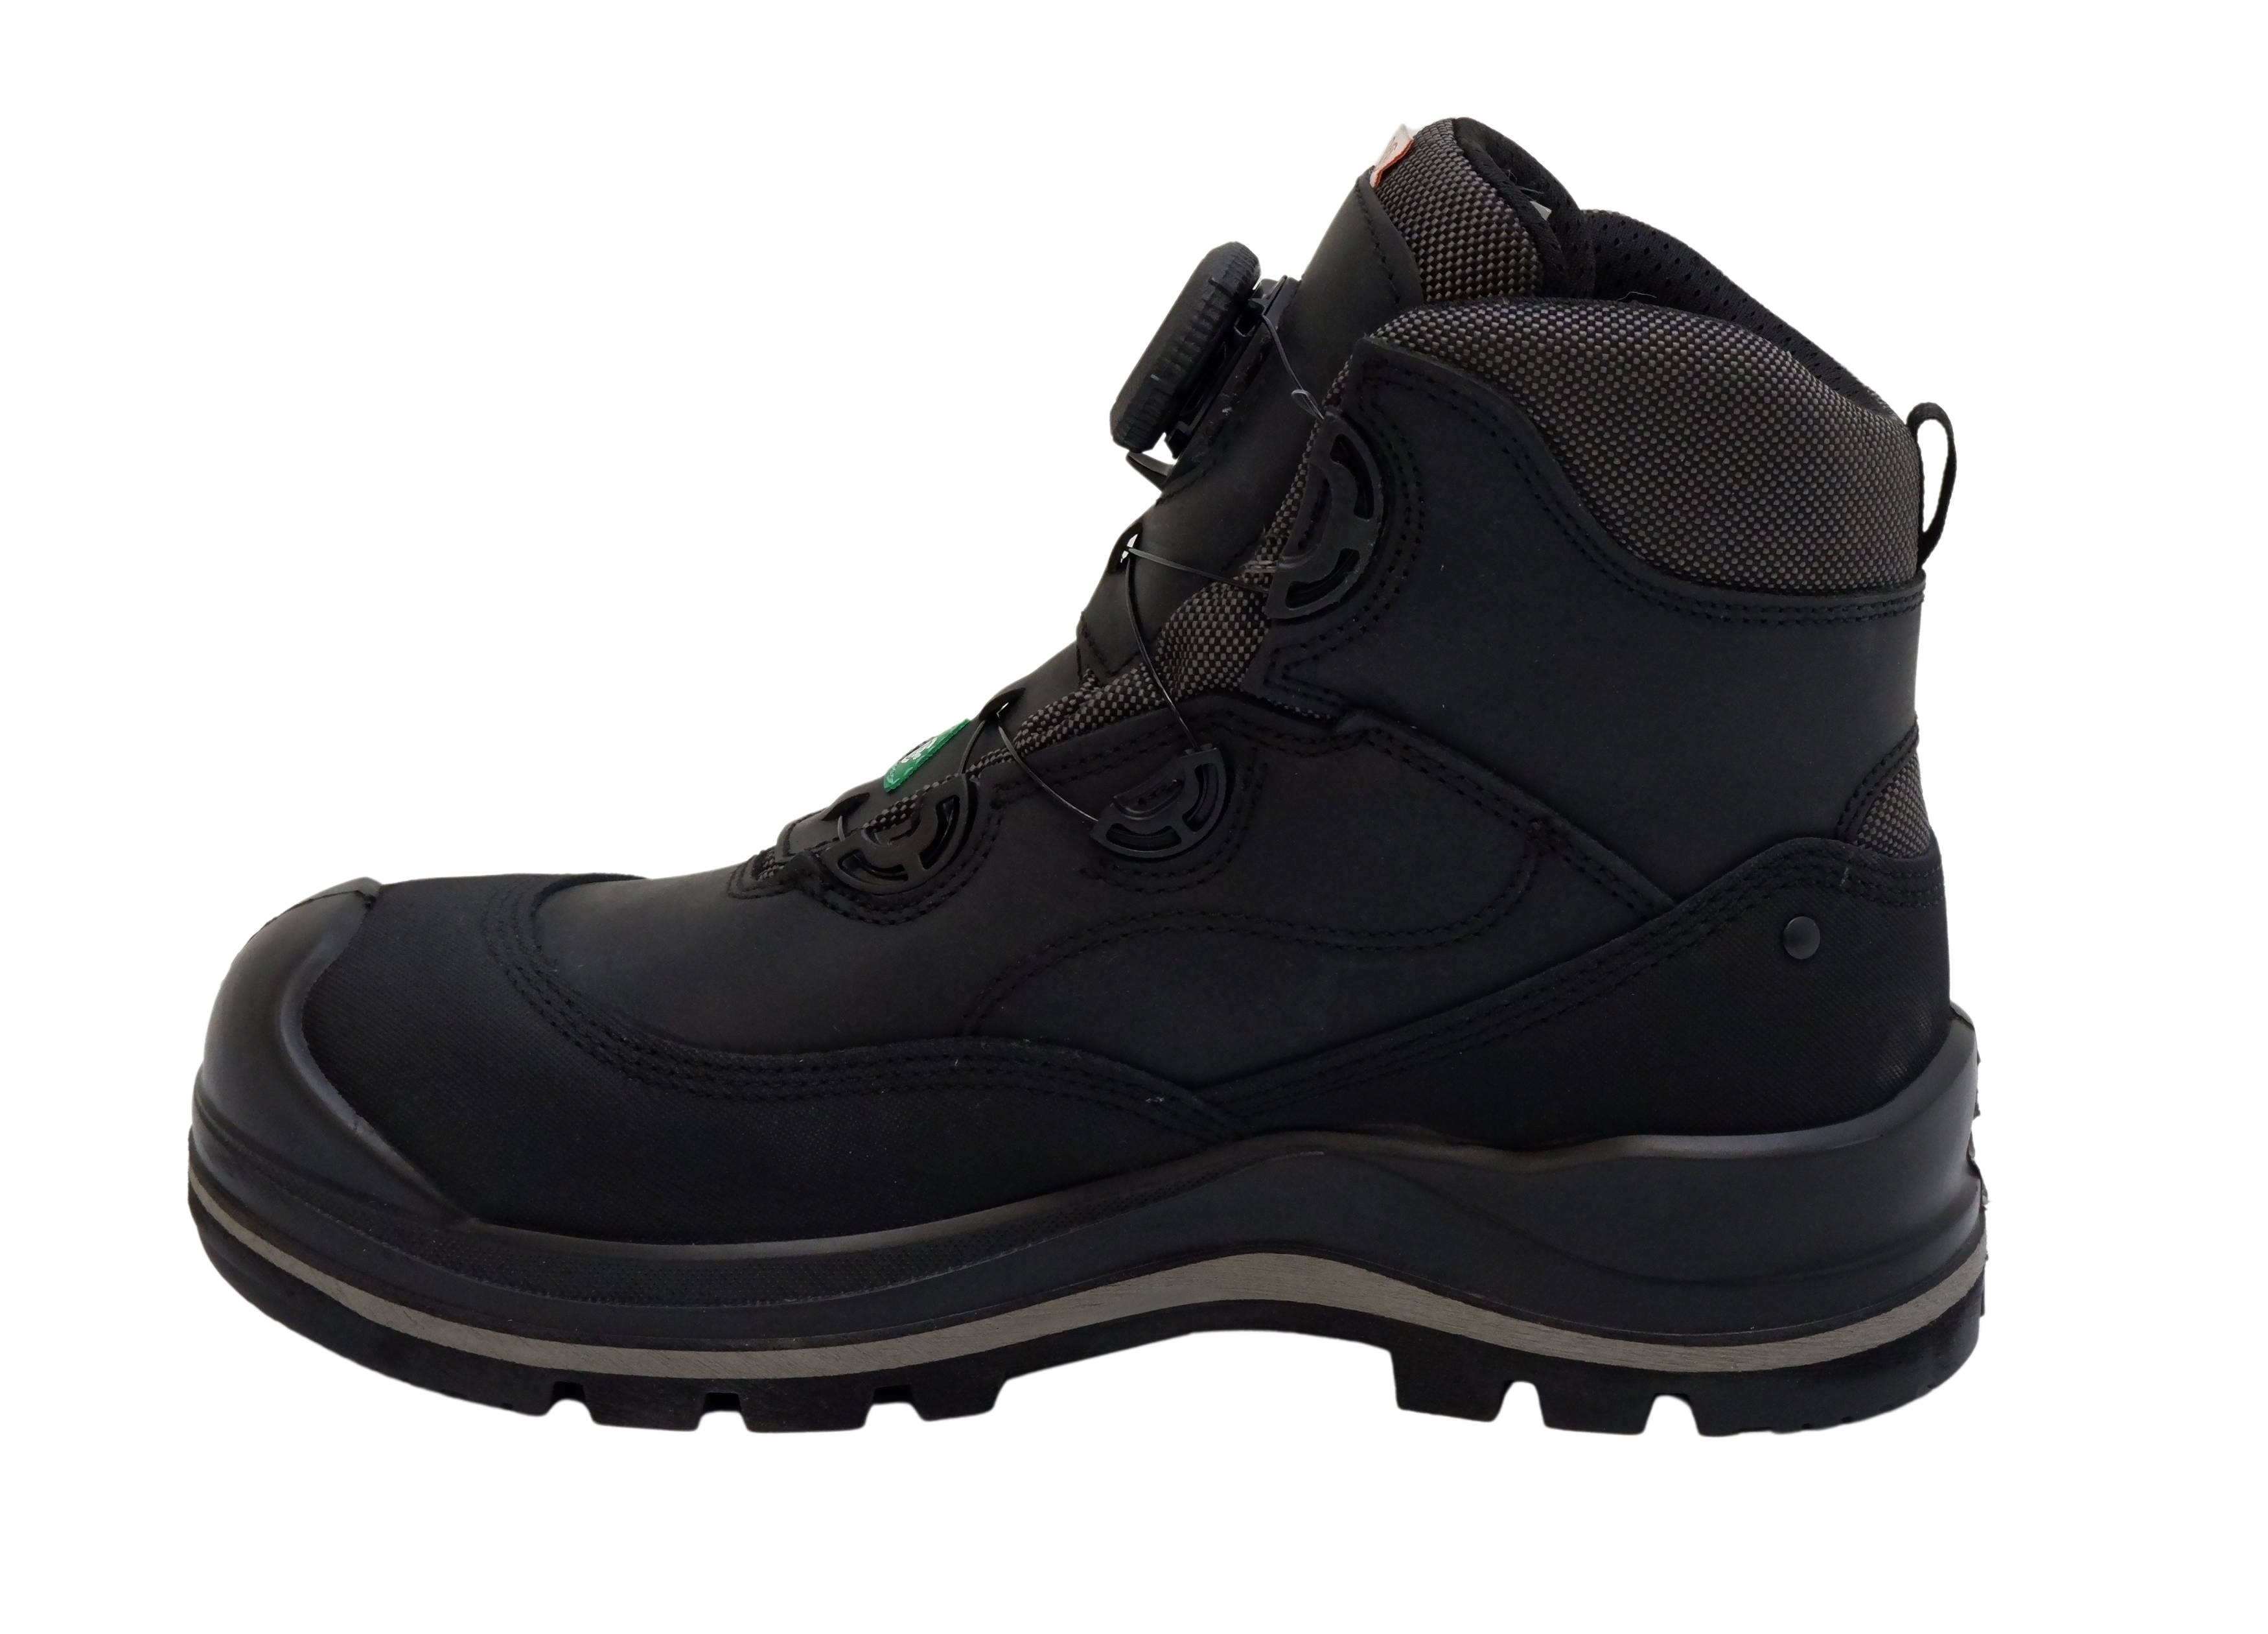 Grisport Men's Safety Work Boots BOA Wolf 6" Waterproof with Vibram® Sole and Perforated Composite Toe Cap Sizes 7-14